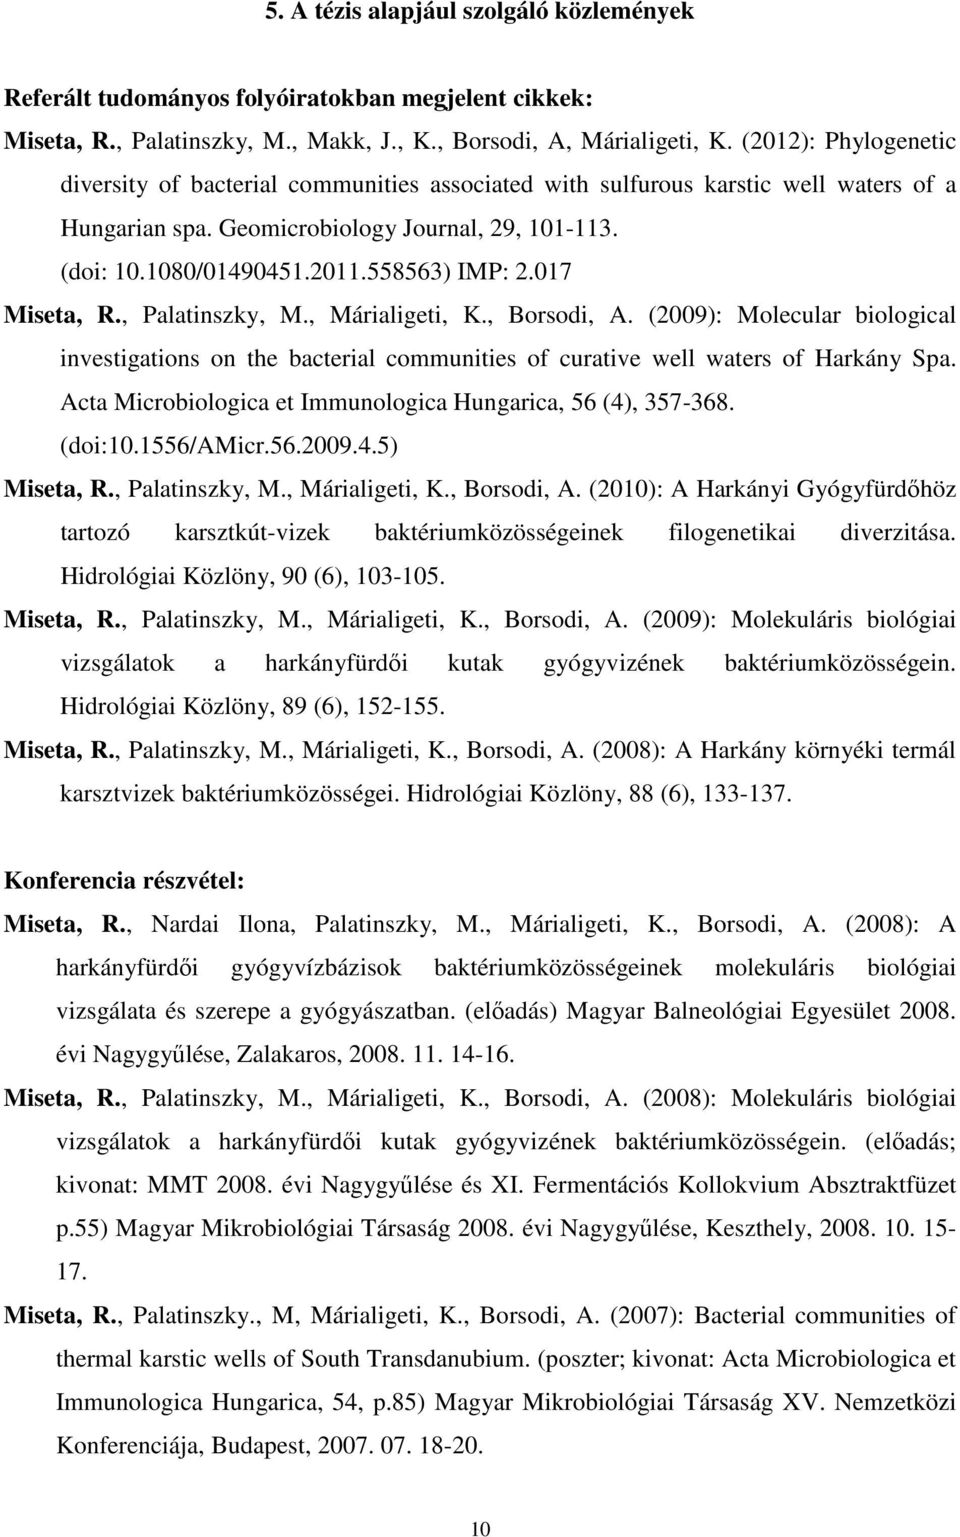 558563) IMP: 2.017 Miseta, R., Palatinszky, M., Márialigeti, K., Borsodi, A. (2009): Molecular biological investigations on the bacterial communities of curative well waters of Harkány Spa.